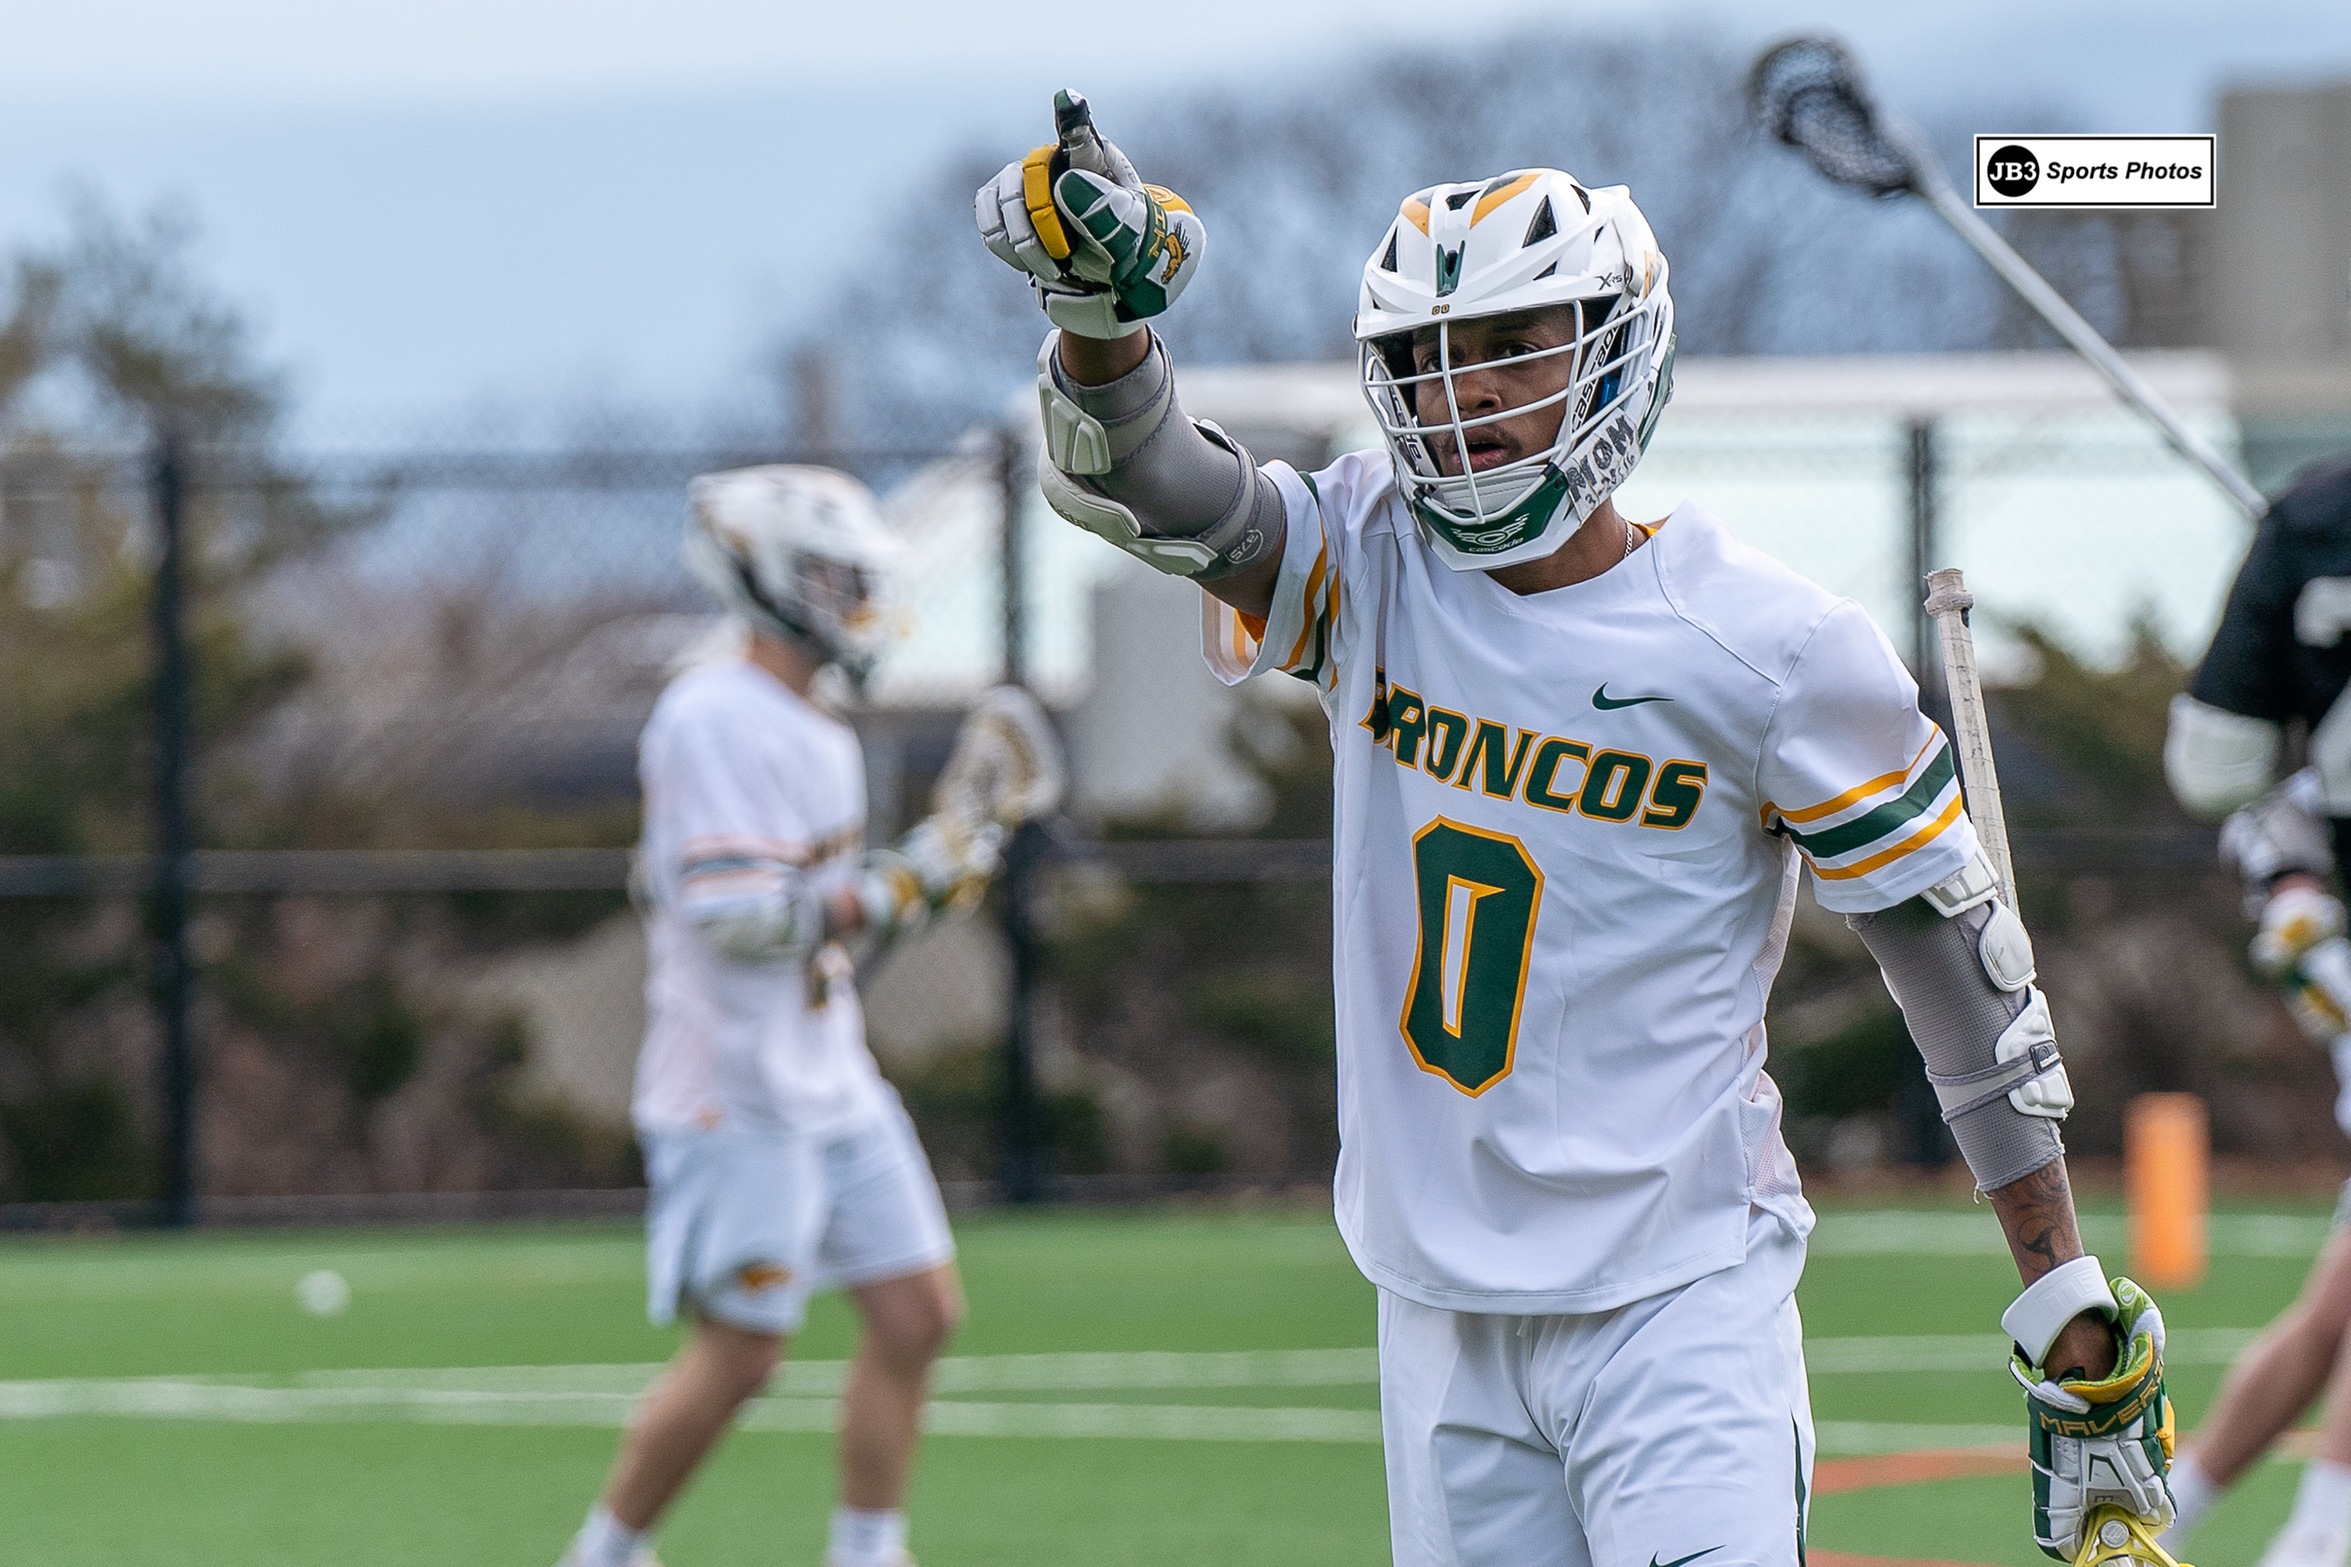 Broncos Fall at New Paltz, Five Game Win Streak Snapped